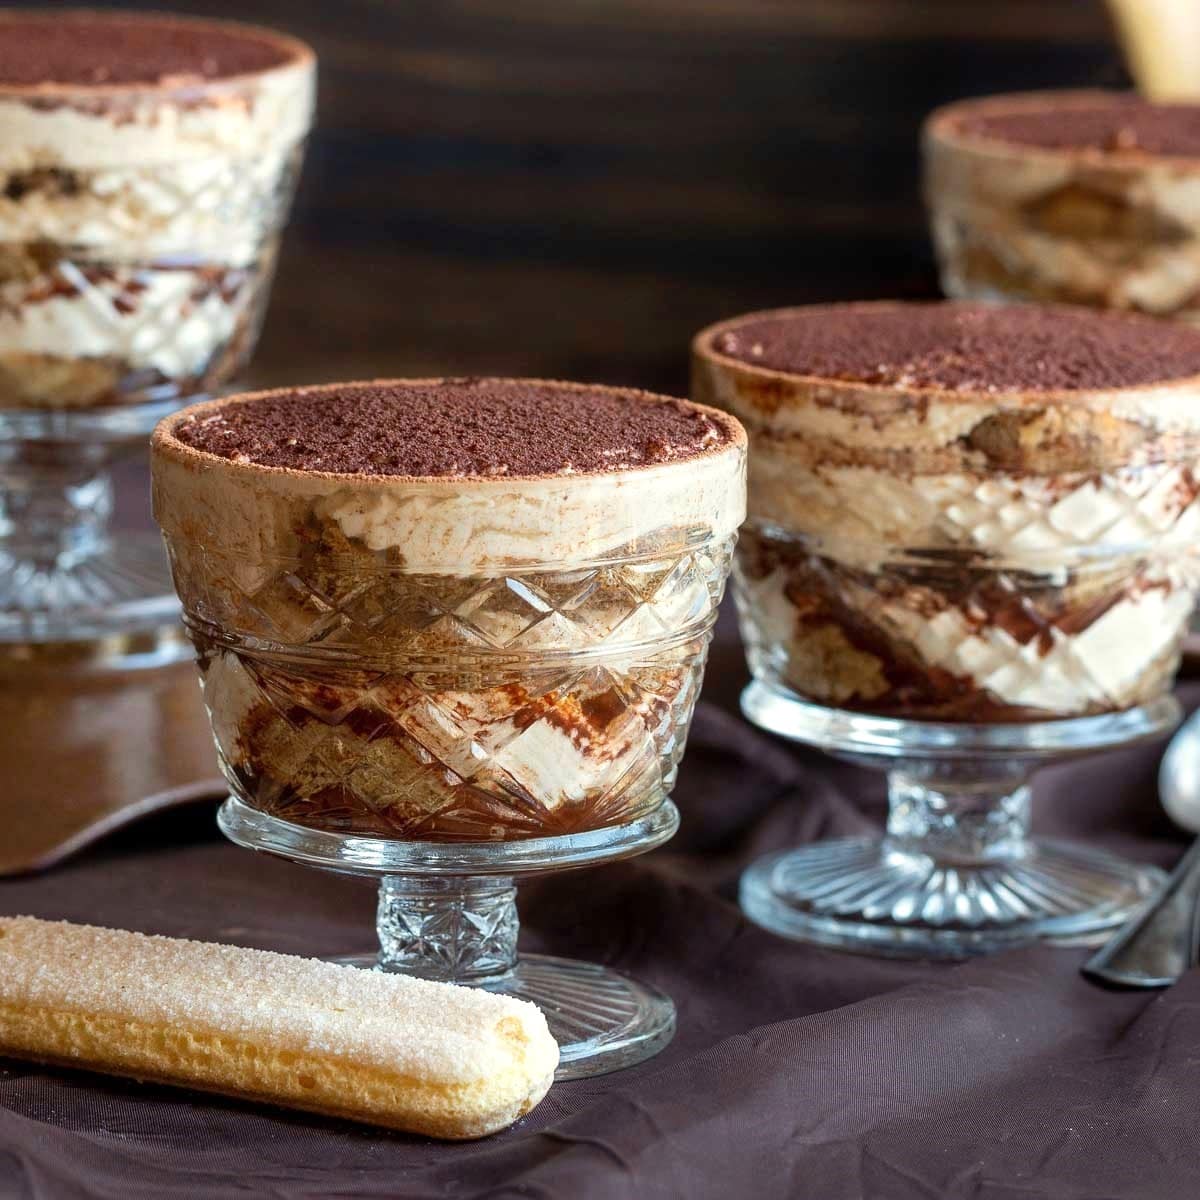 4 mini individual eggless tiramisu cups dusted with cocoa powder with lady finger biscuits on the side.